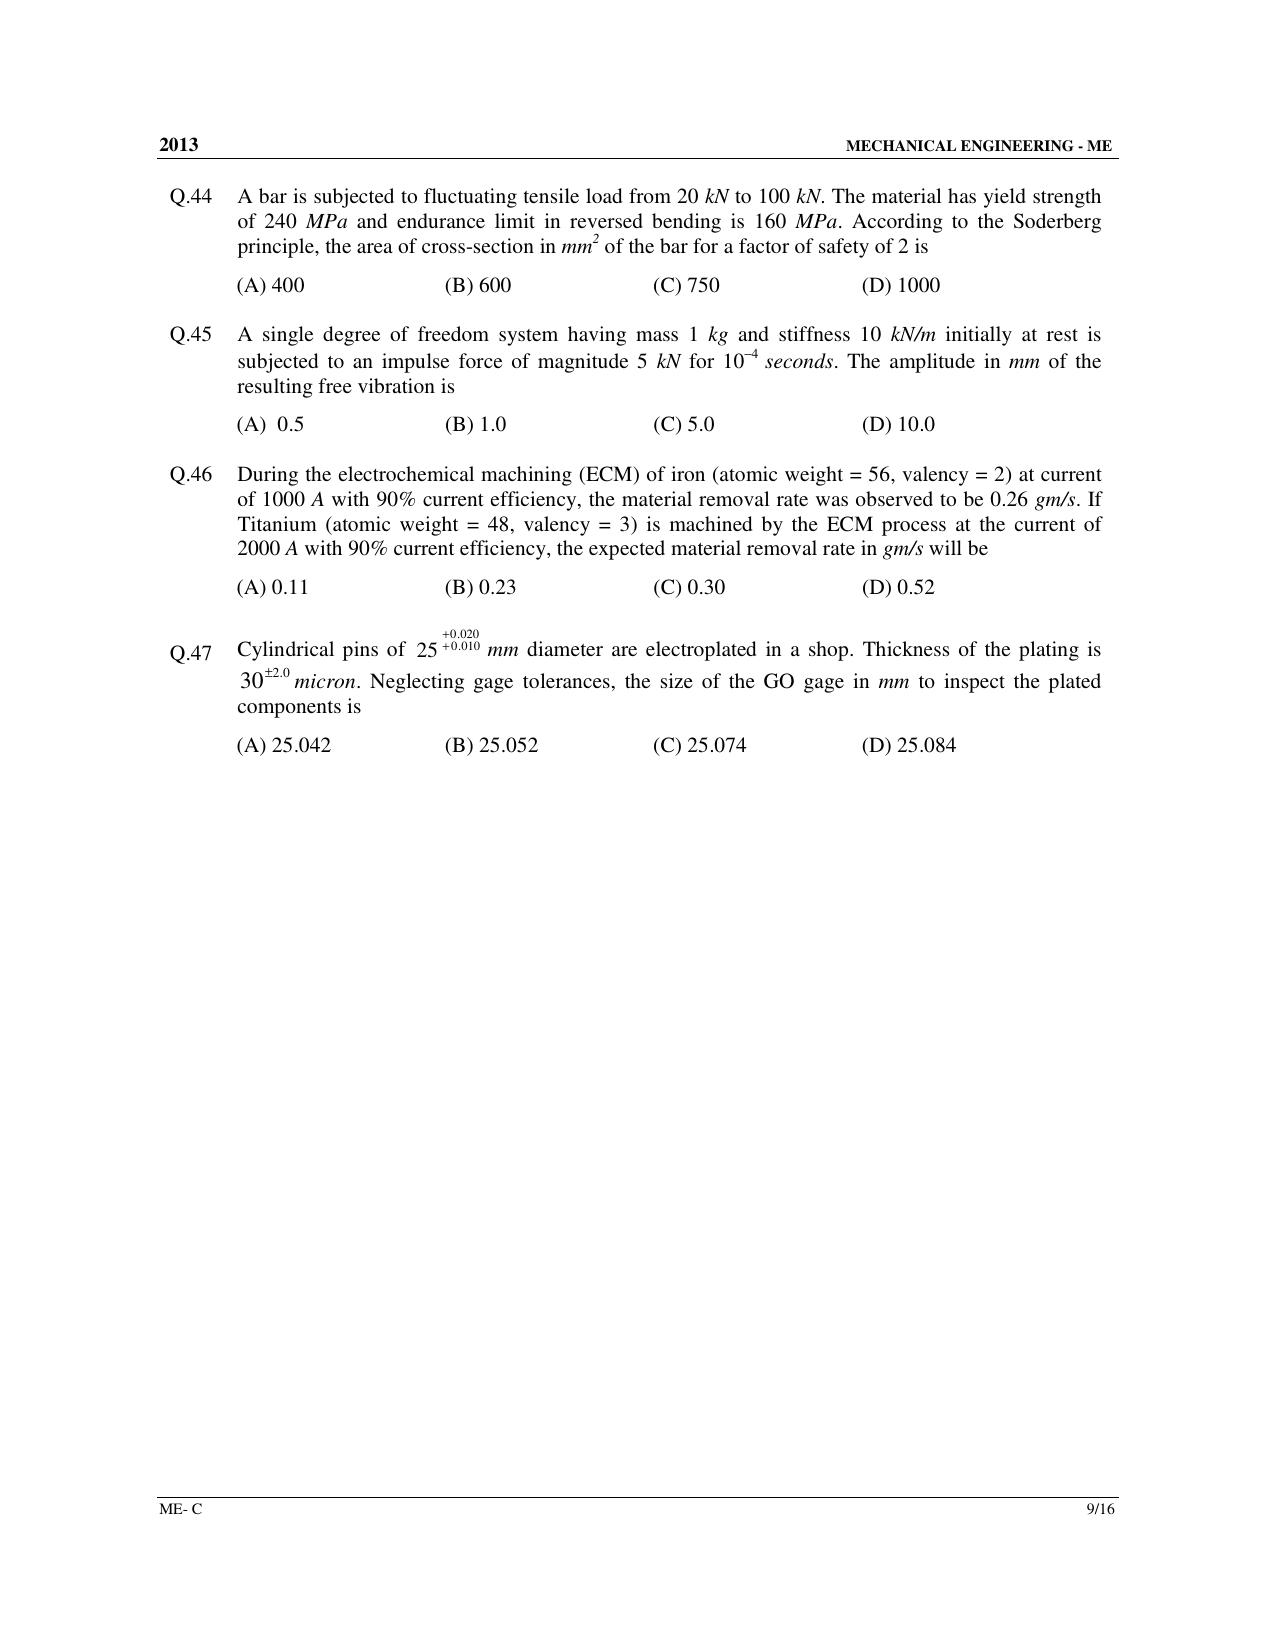 GATE 2013 Mechanical Engineering (ME) Question Paper with Answer Key - Page 38